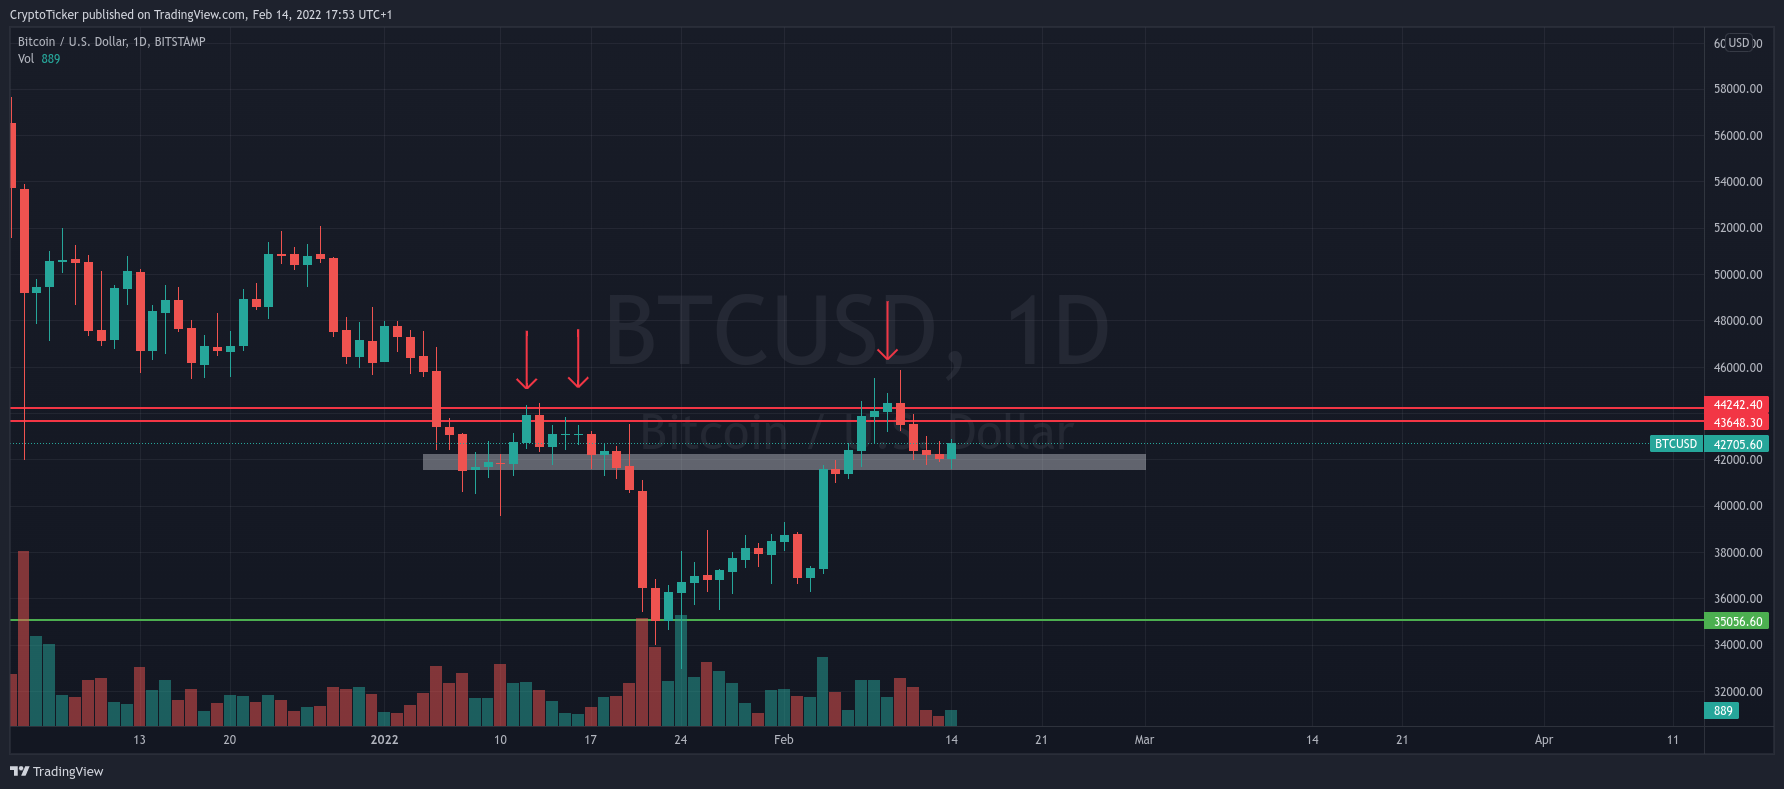 BTC/USD 1-day chart showing the resistance area in Bitcoin price